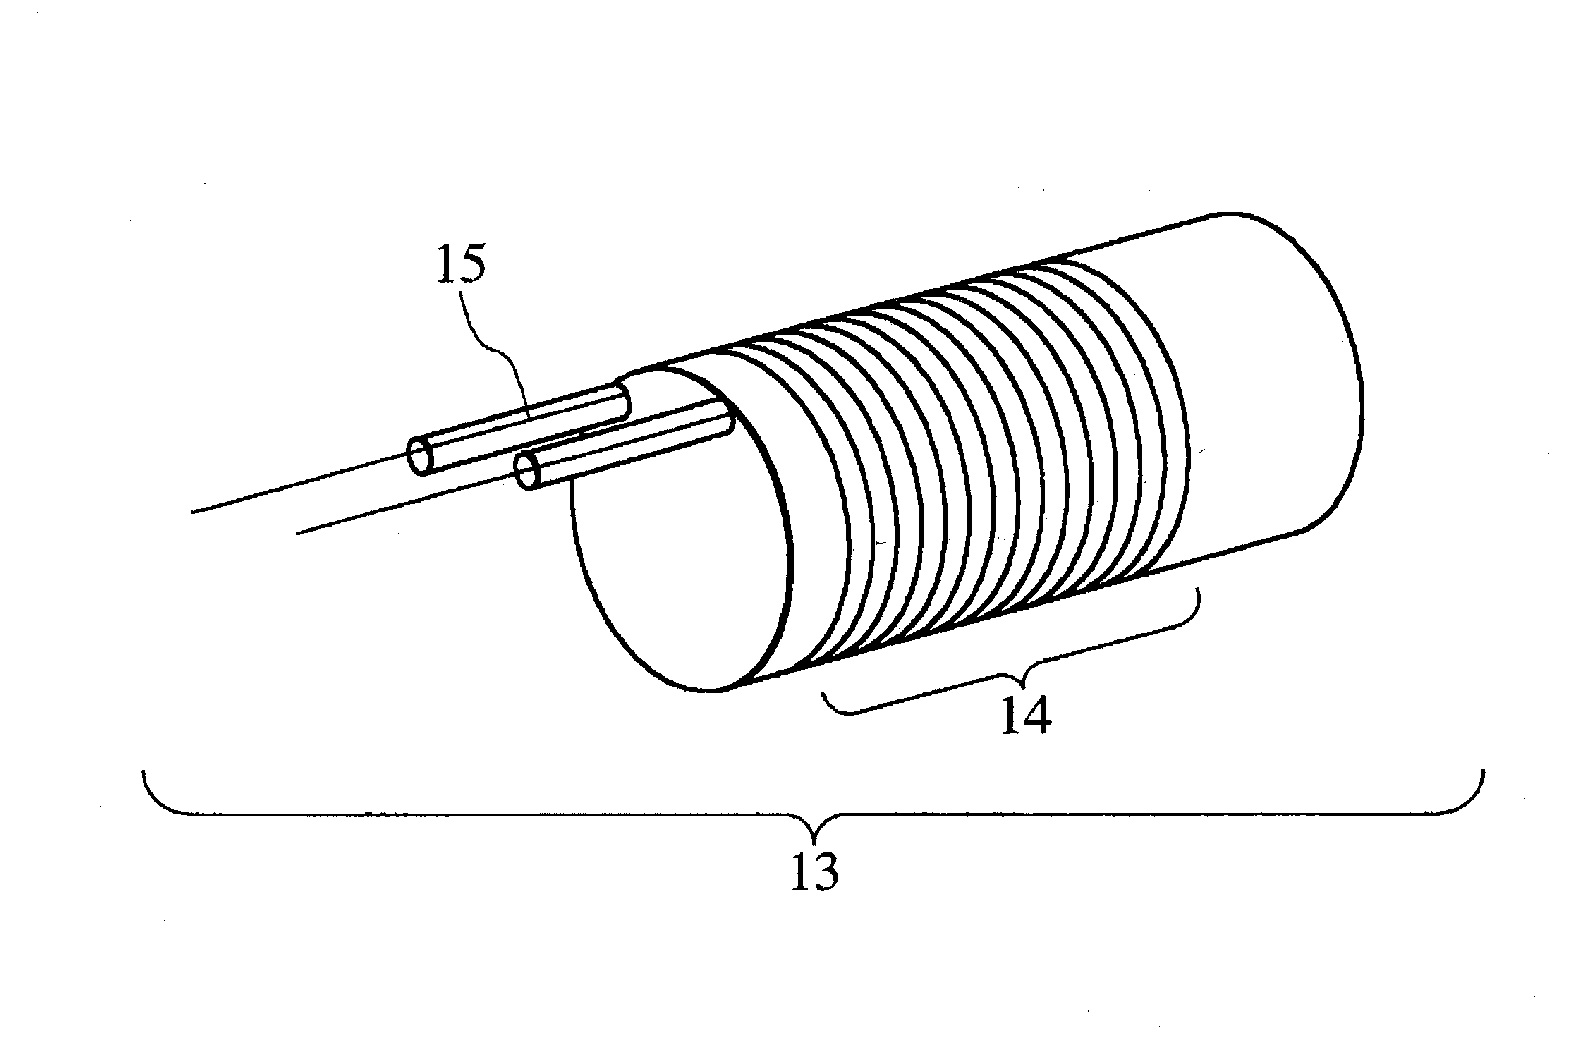 Superconducting wire rod, persistent current switch, and superconducting magnet